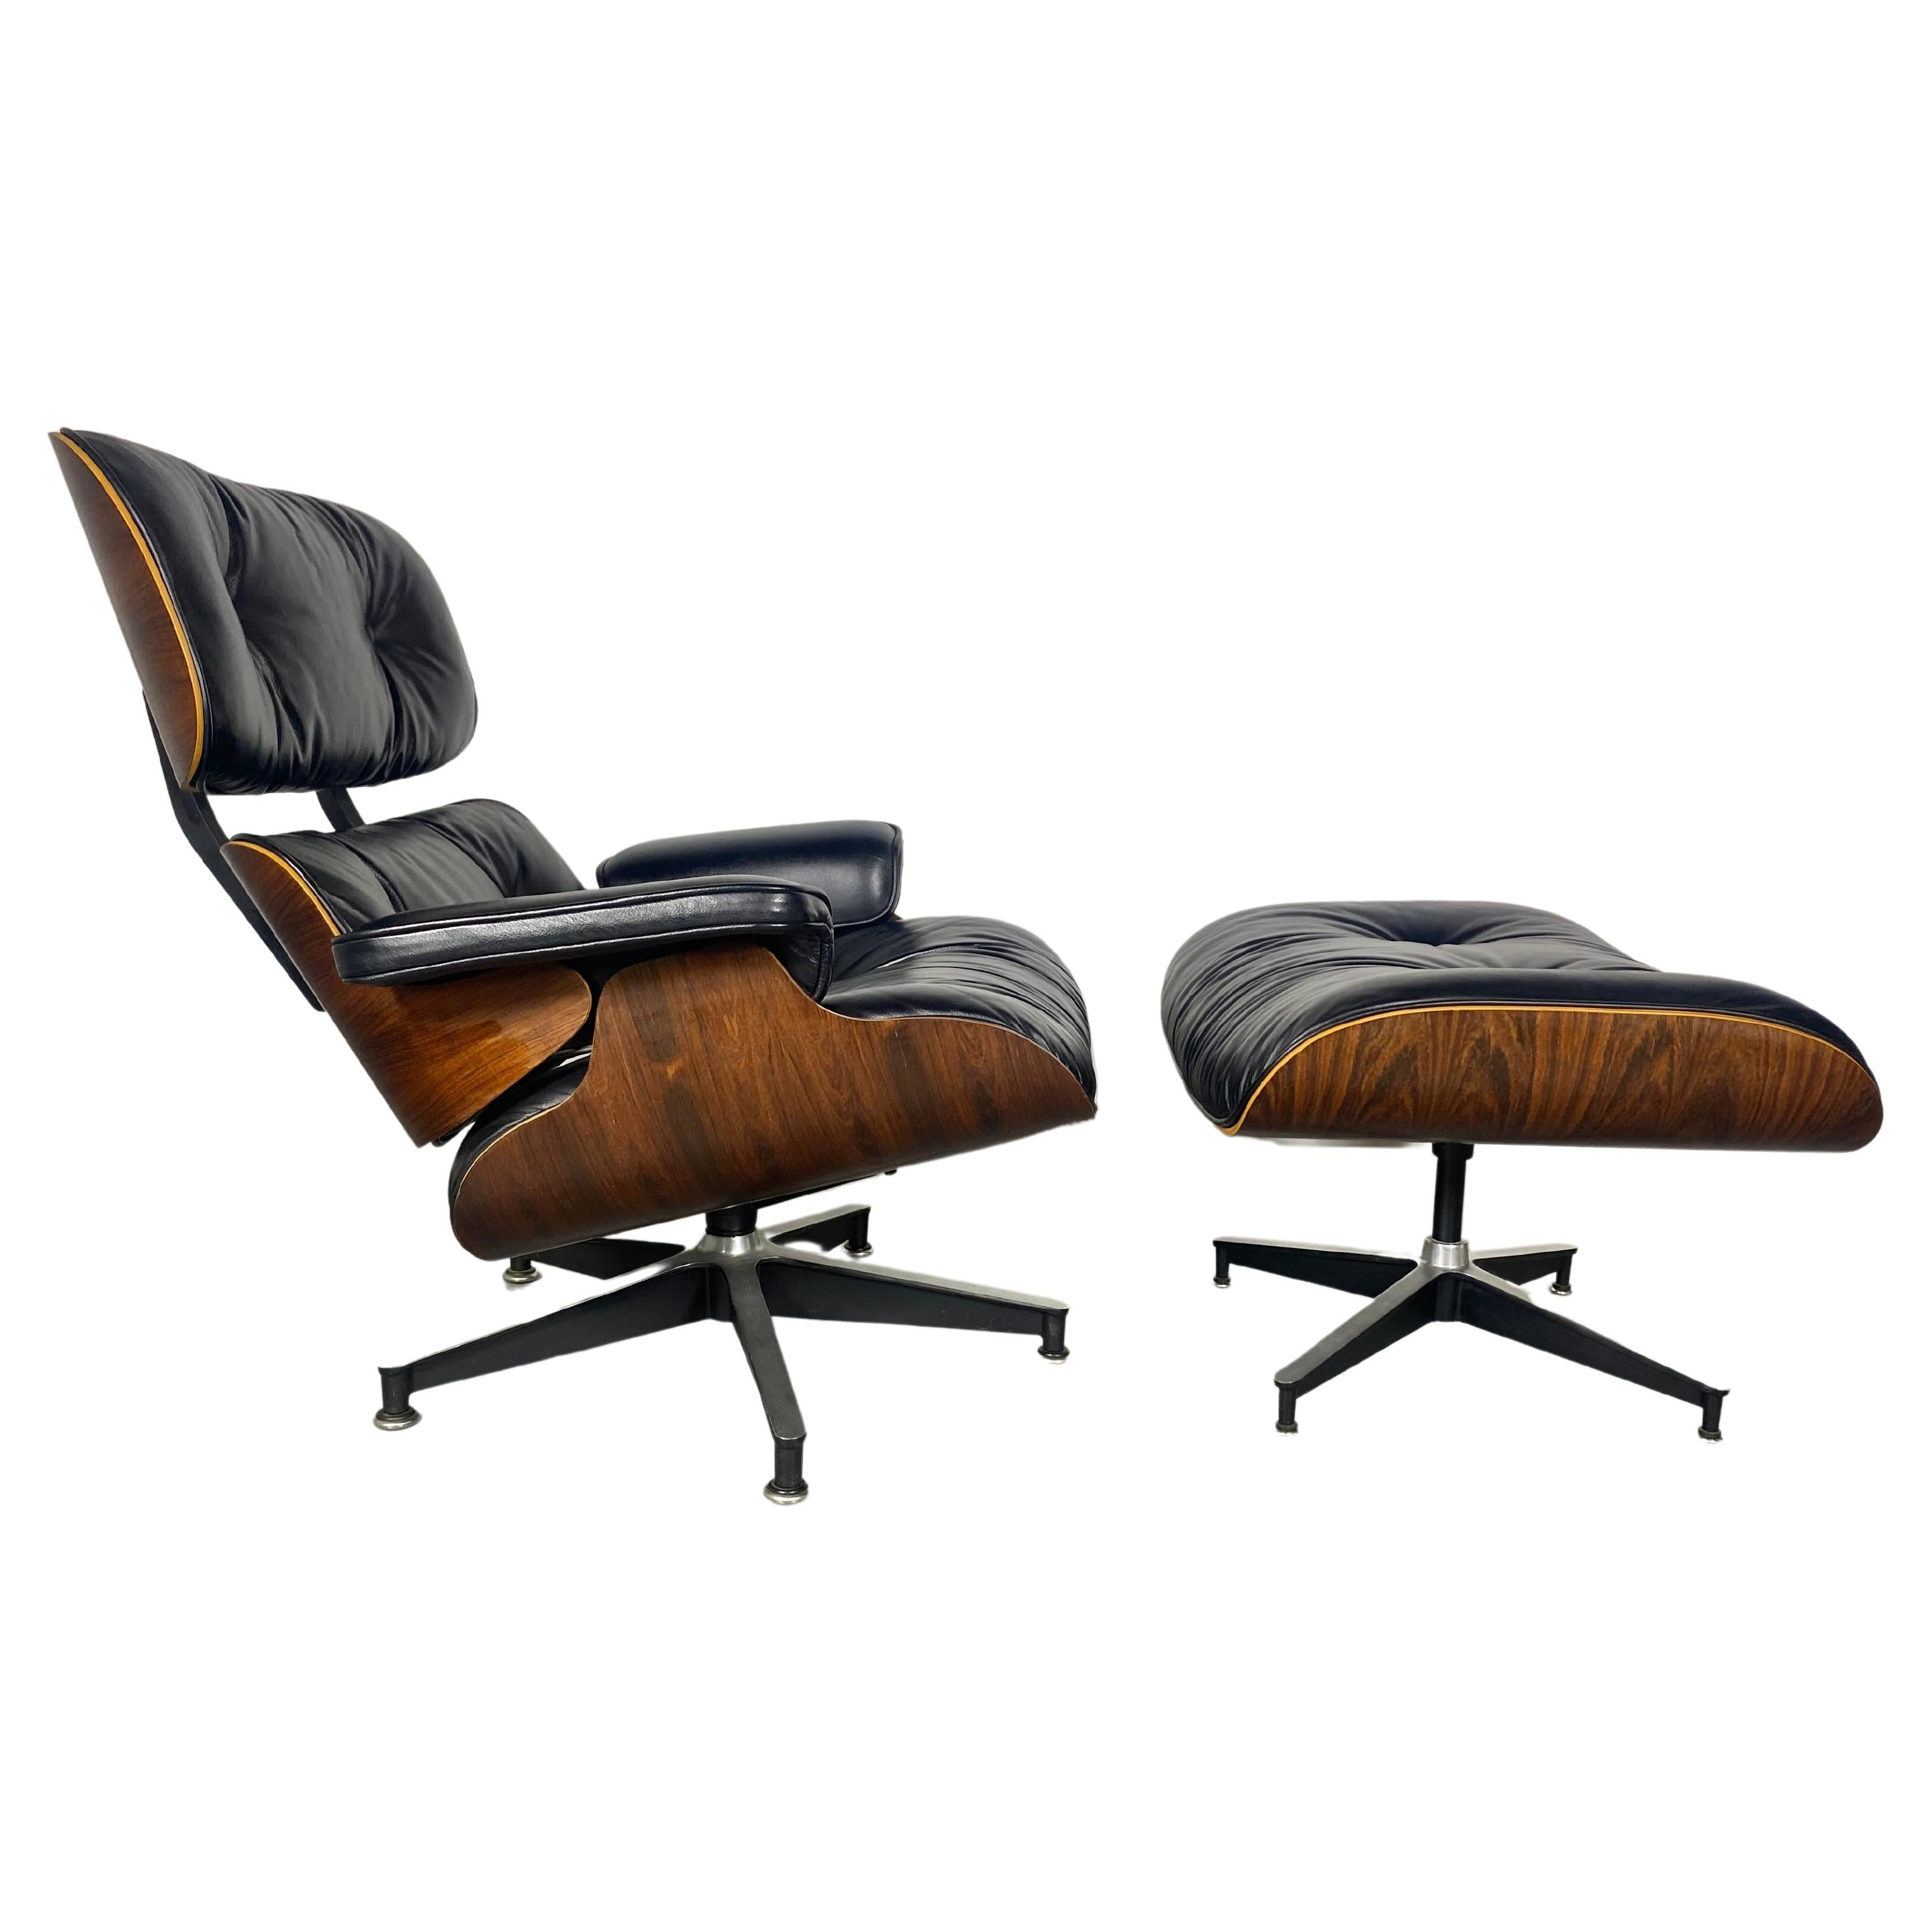 CLassic Brazilian Rosewood and Leather Eames Lounge Chair & Ott Herman Miller